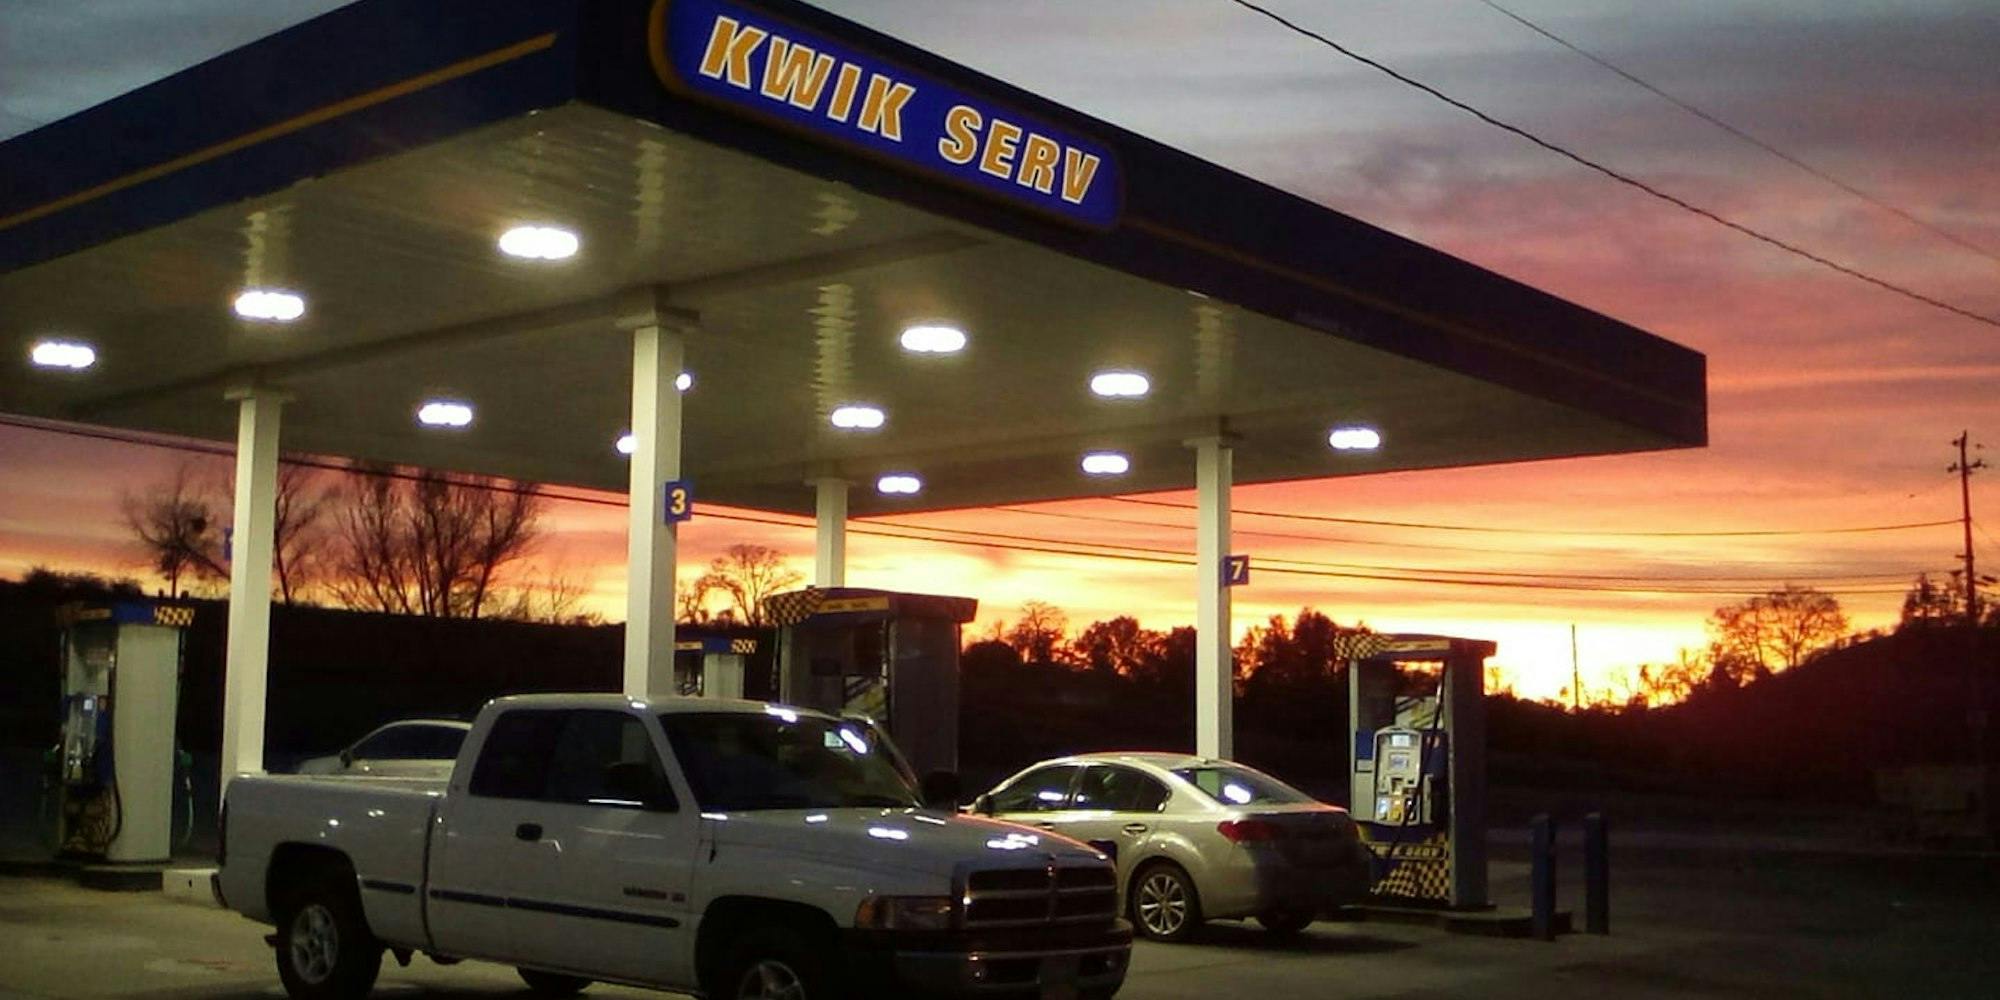 $4.4M Kwik Serv Acquisition in South San Francisco